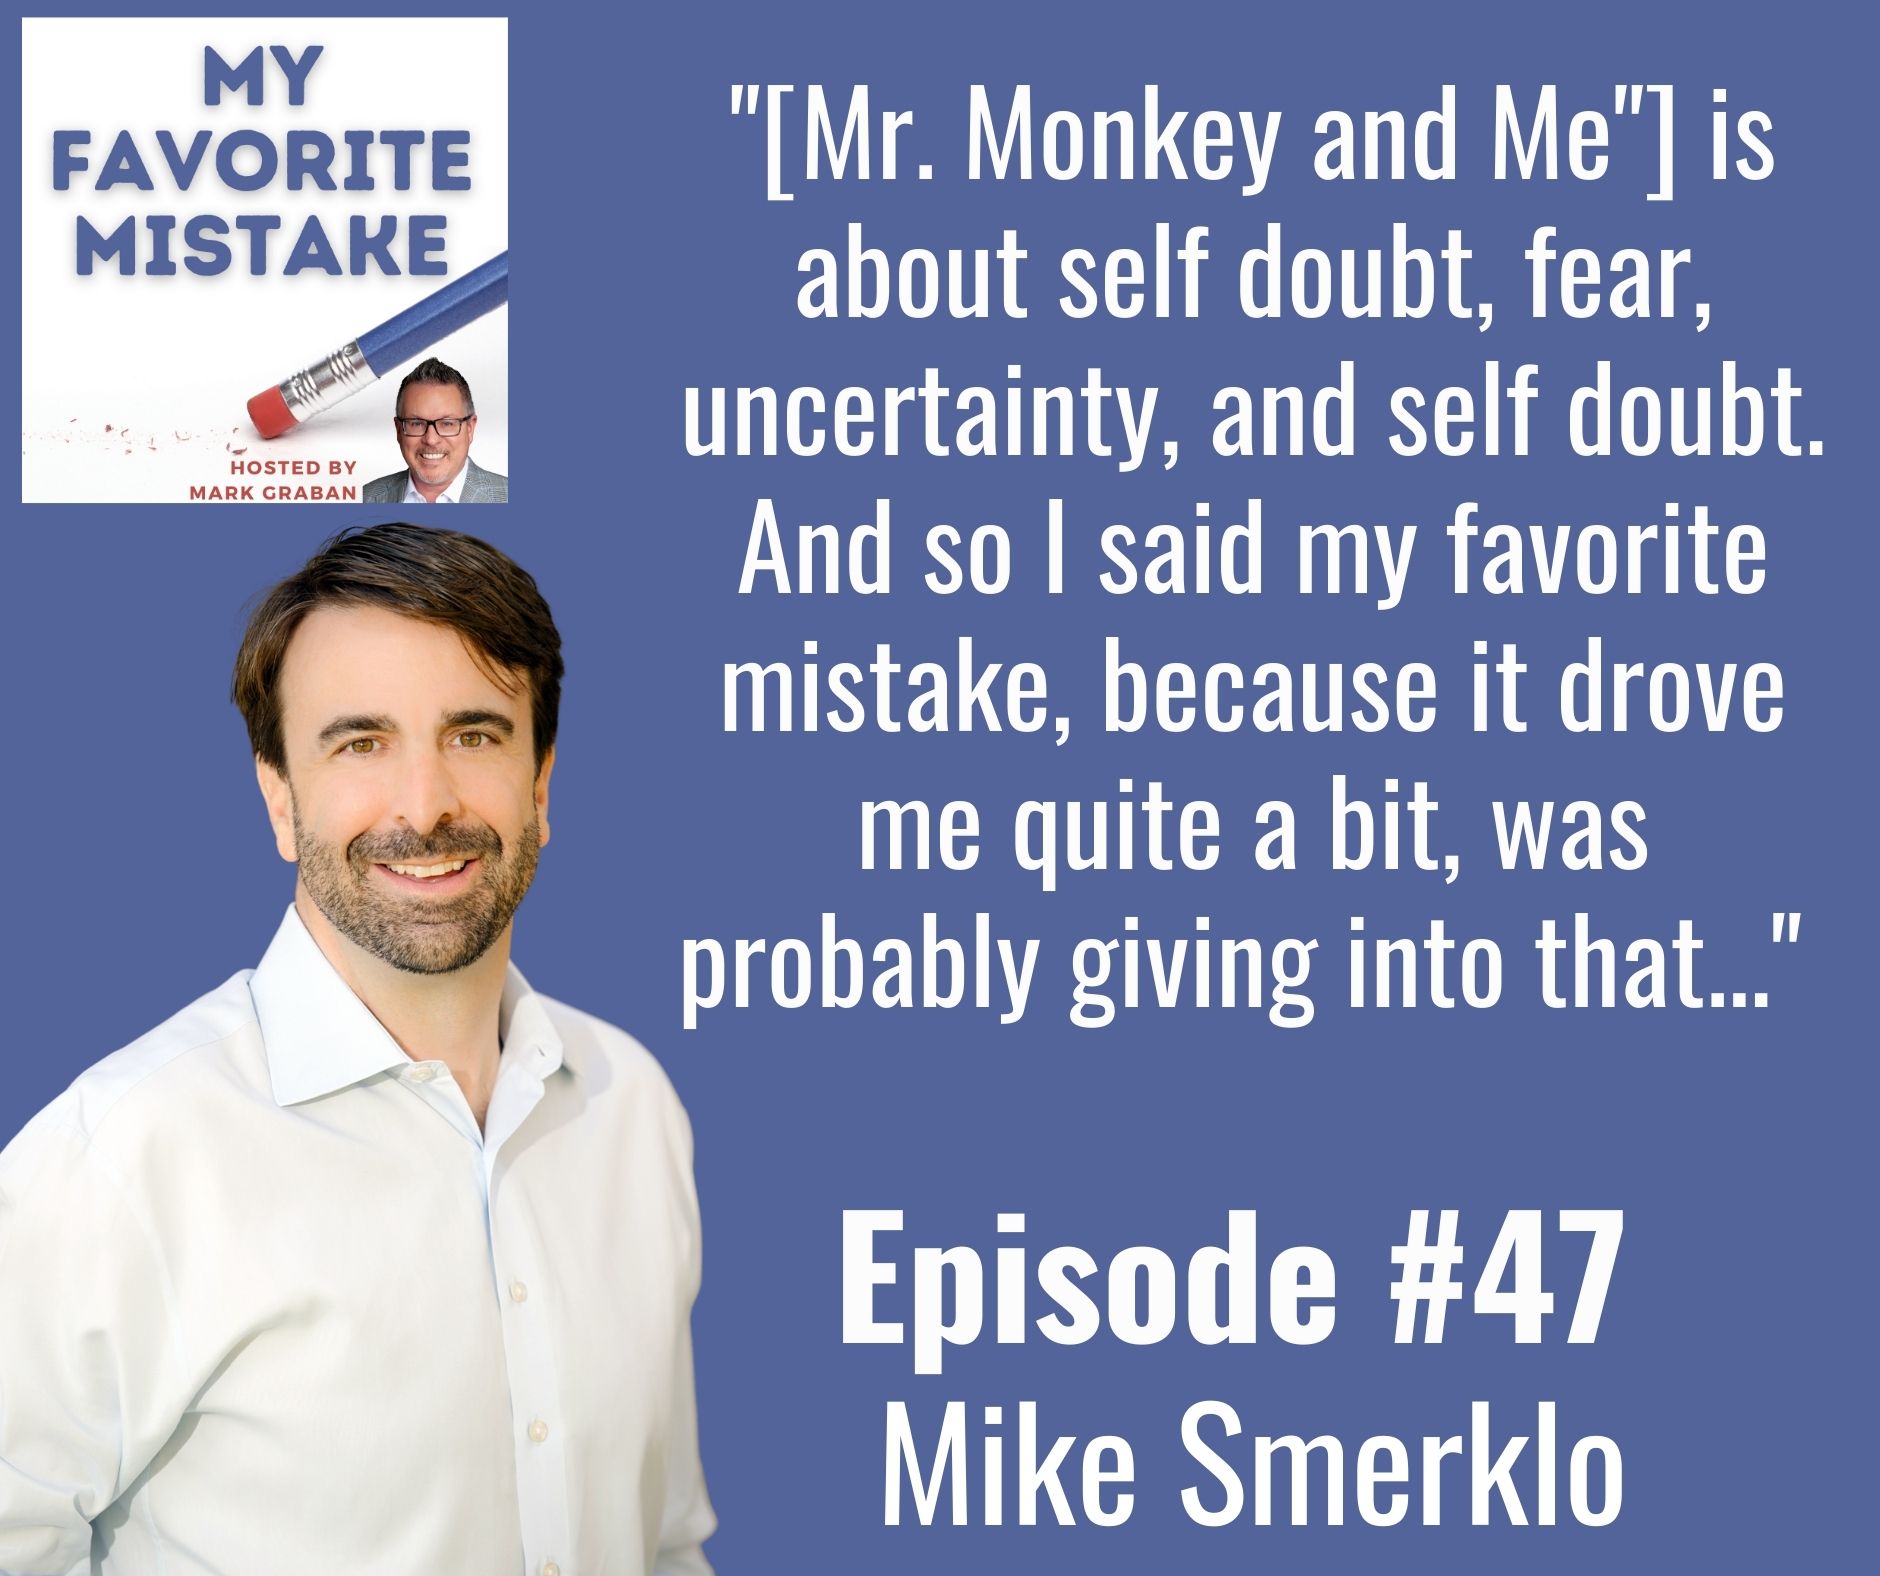 "[Mr. Monkey and Me"] is about self doubt, fear, uncertainty, and self doubt. And so I said my favorite mistake, because it drove me quite a bit, was probably giving into that..." 